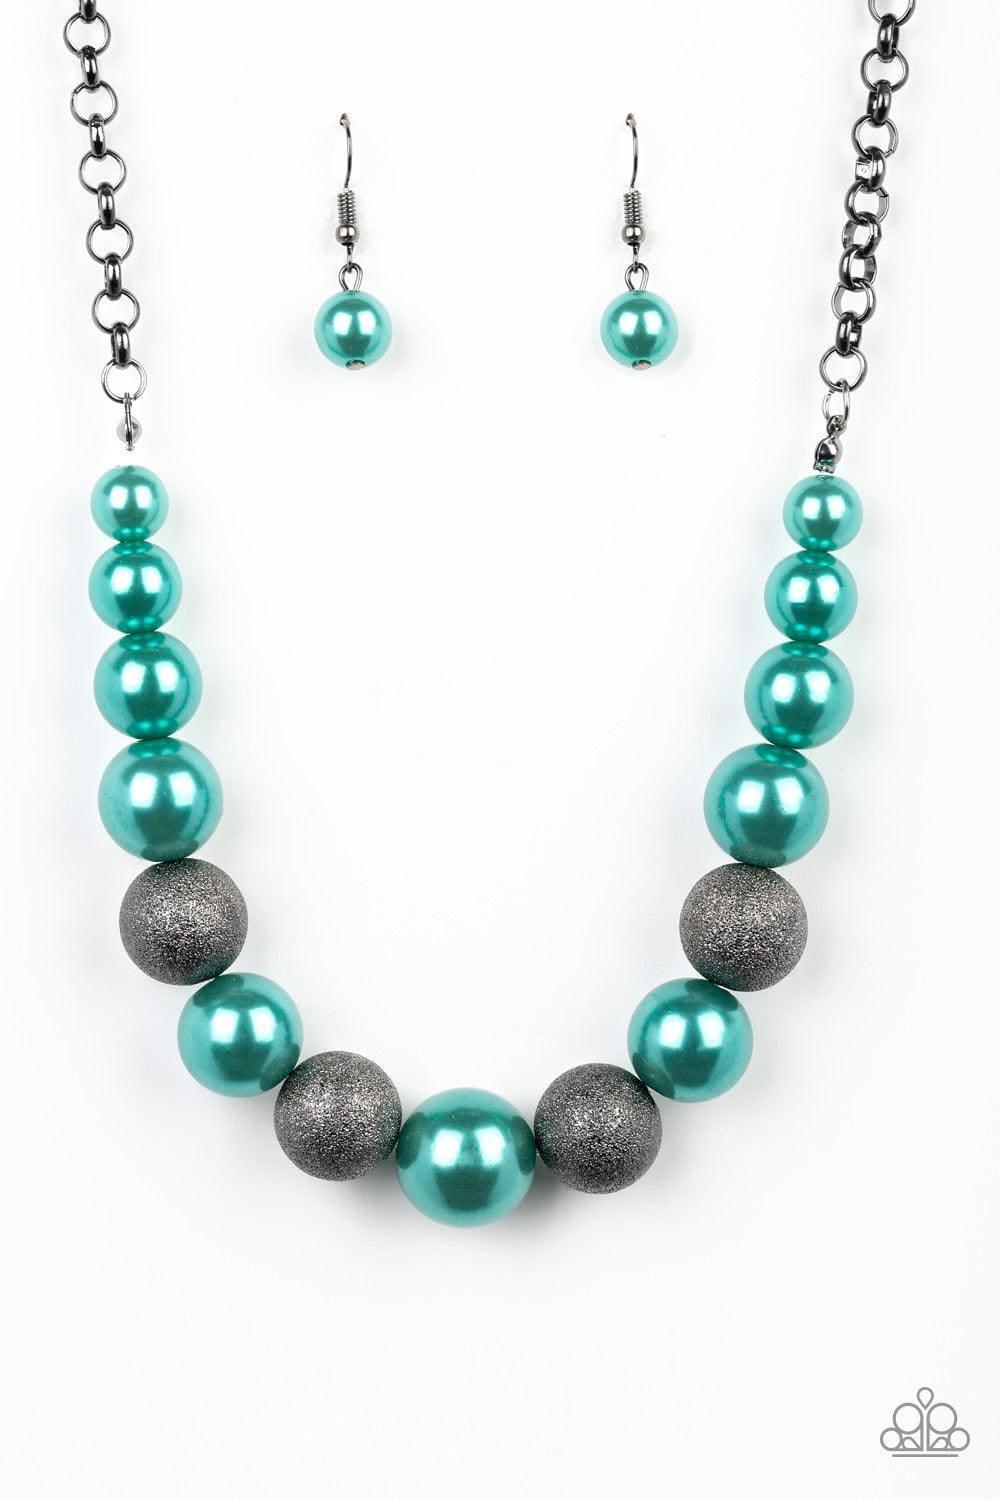 Paparazzi Accessories - Color Me Ceo - Green Necklace - Bling by JessieK